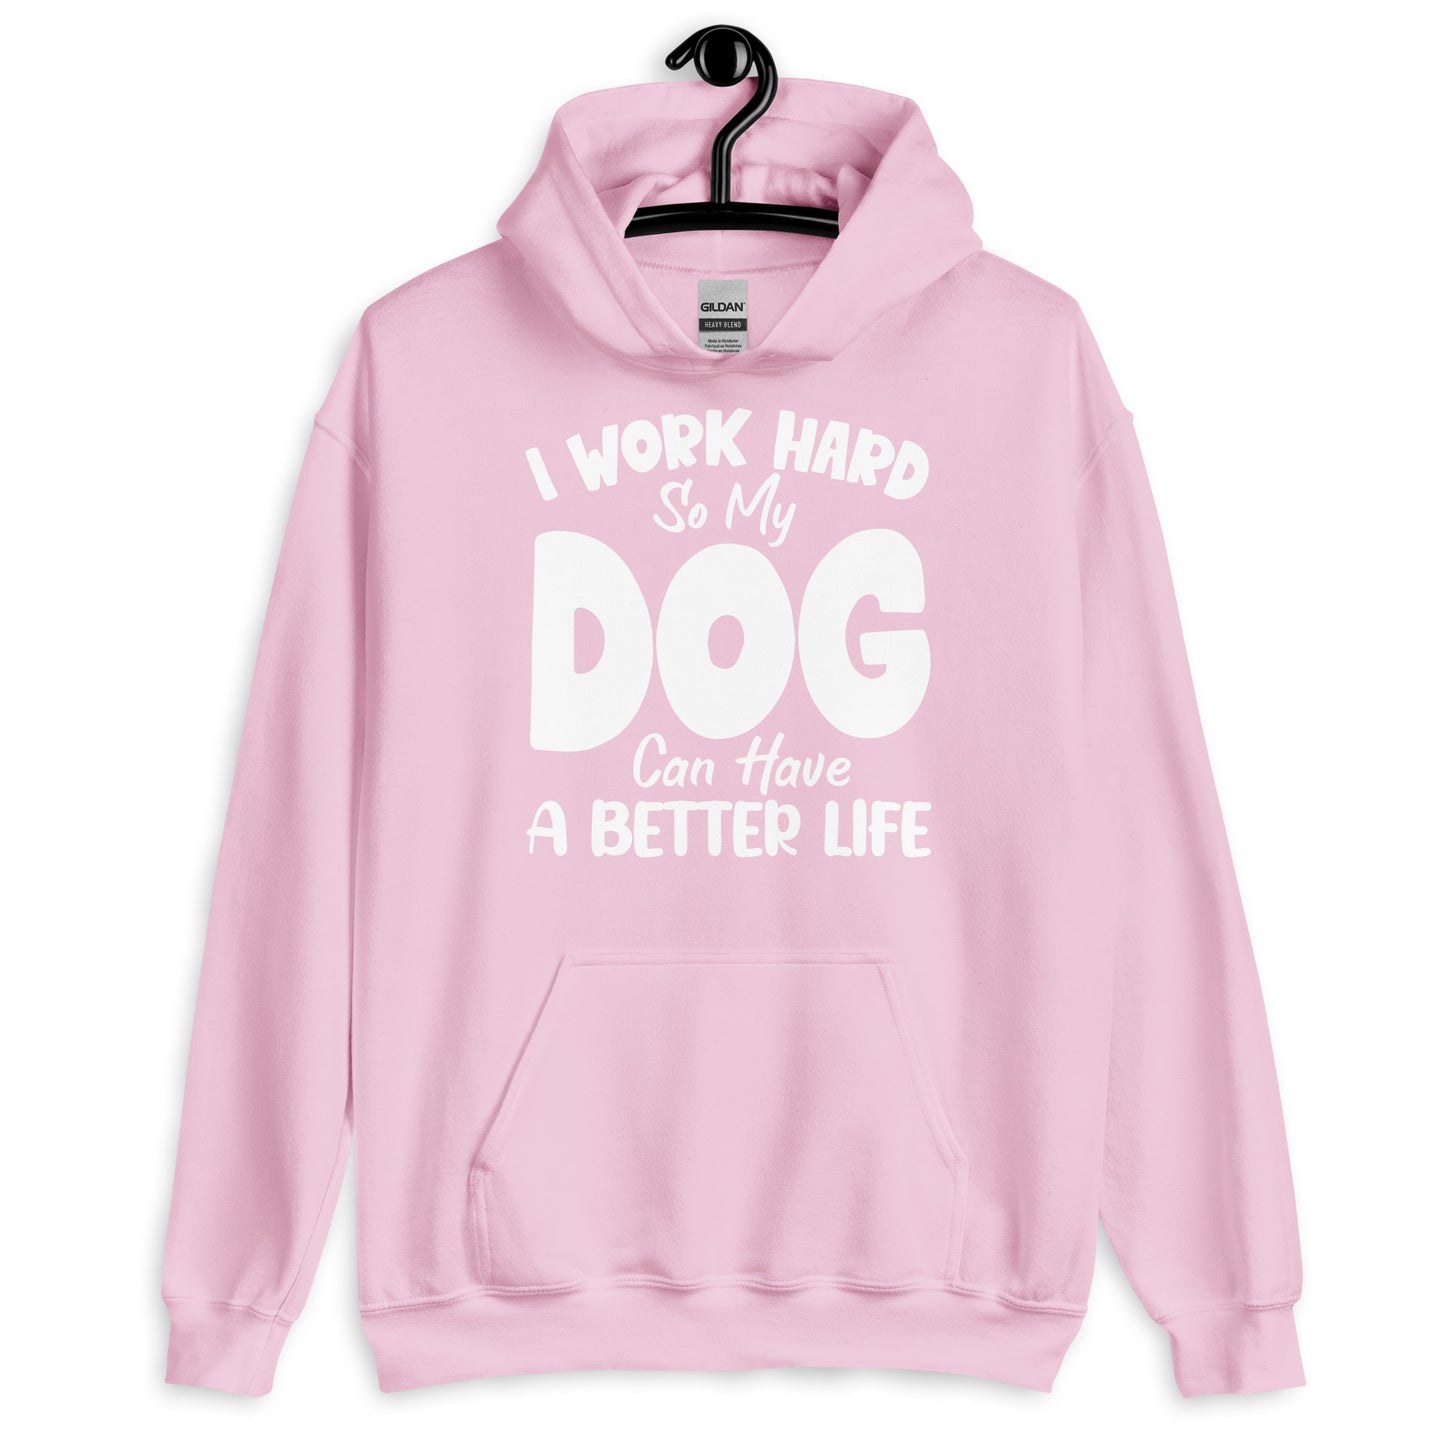 I Work Hard So My Dog Can Have a Better Life Hoodie